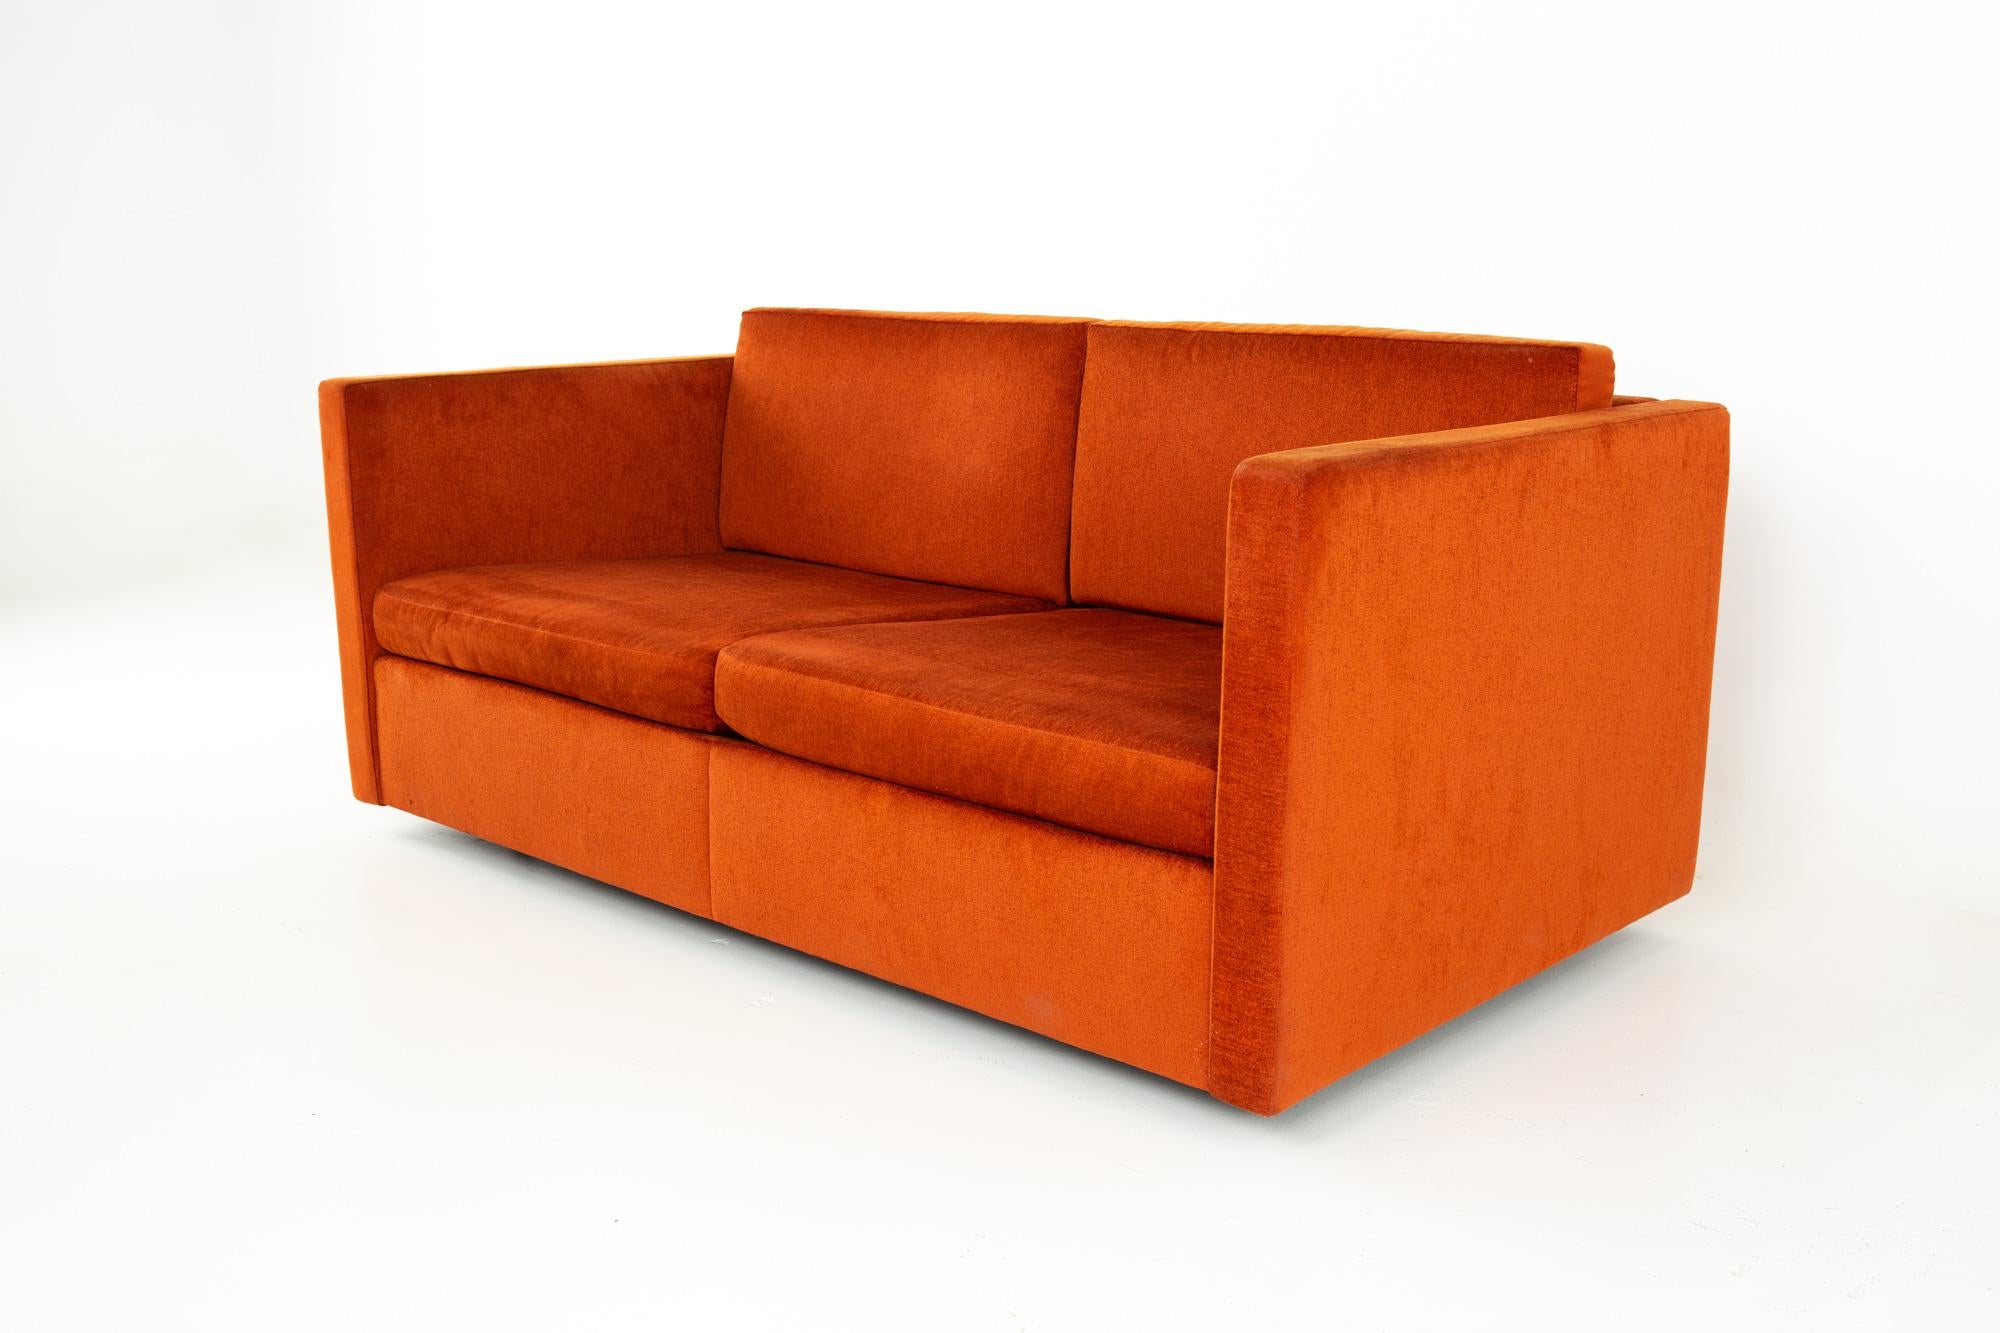 Charles Pfister for Knoll mid century loveseat settee sofa
Loveseat measures: 59.5 wide x 34 deep x 25 high, with a seat height of 13.5 and arm height of 23.5 inches 

All pieces of furniture can be had in what we call restored vintage condition.